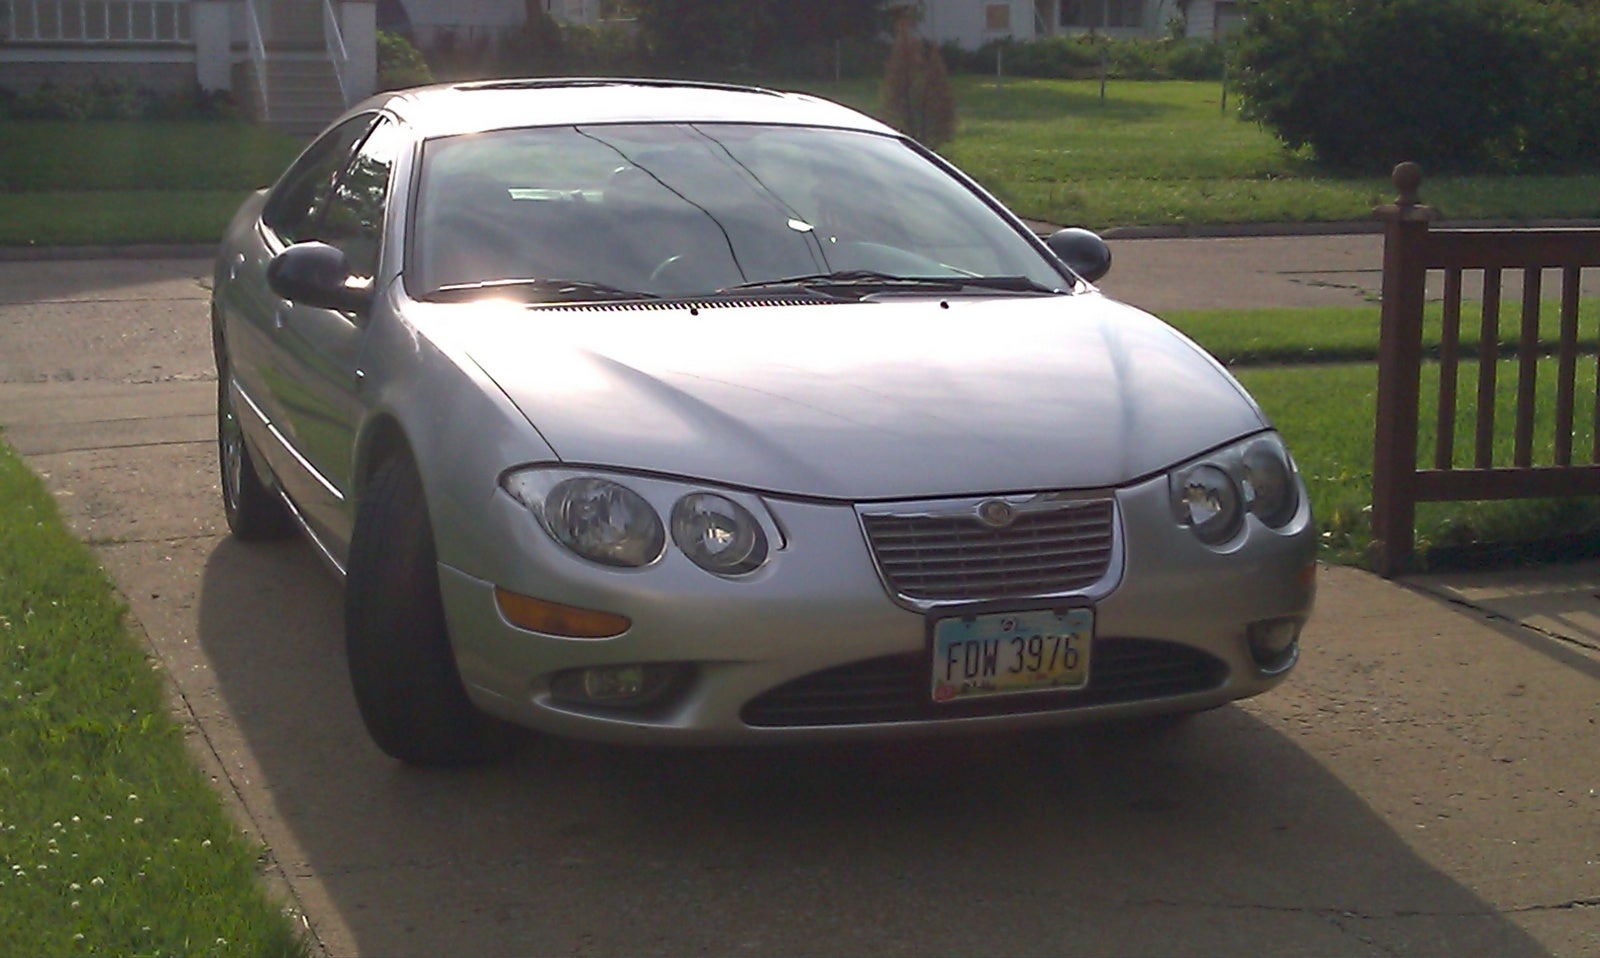 2002 Chrysler 300m special edition review #2